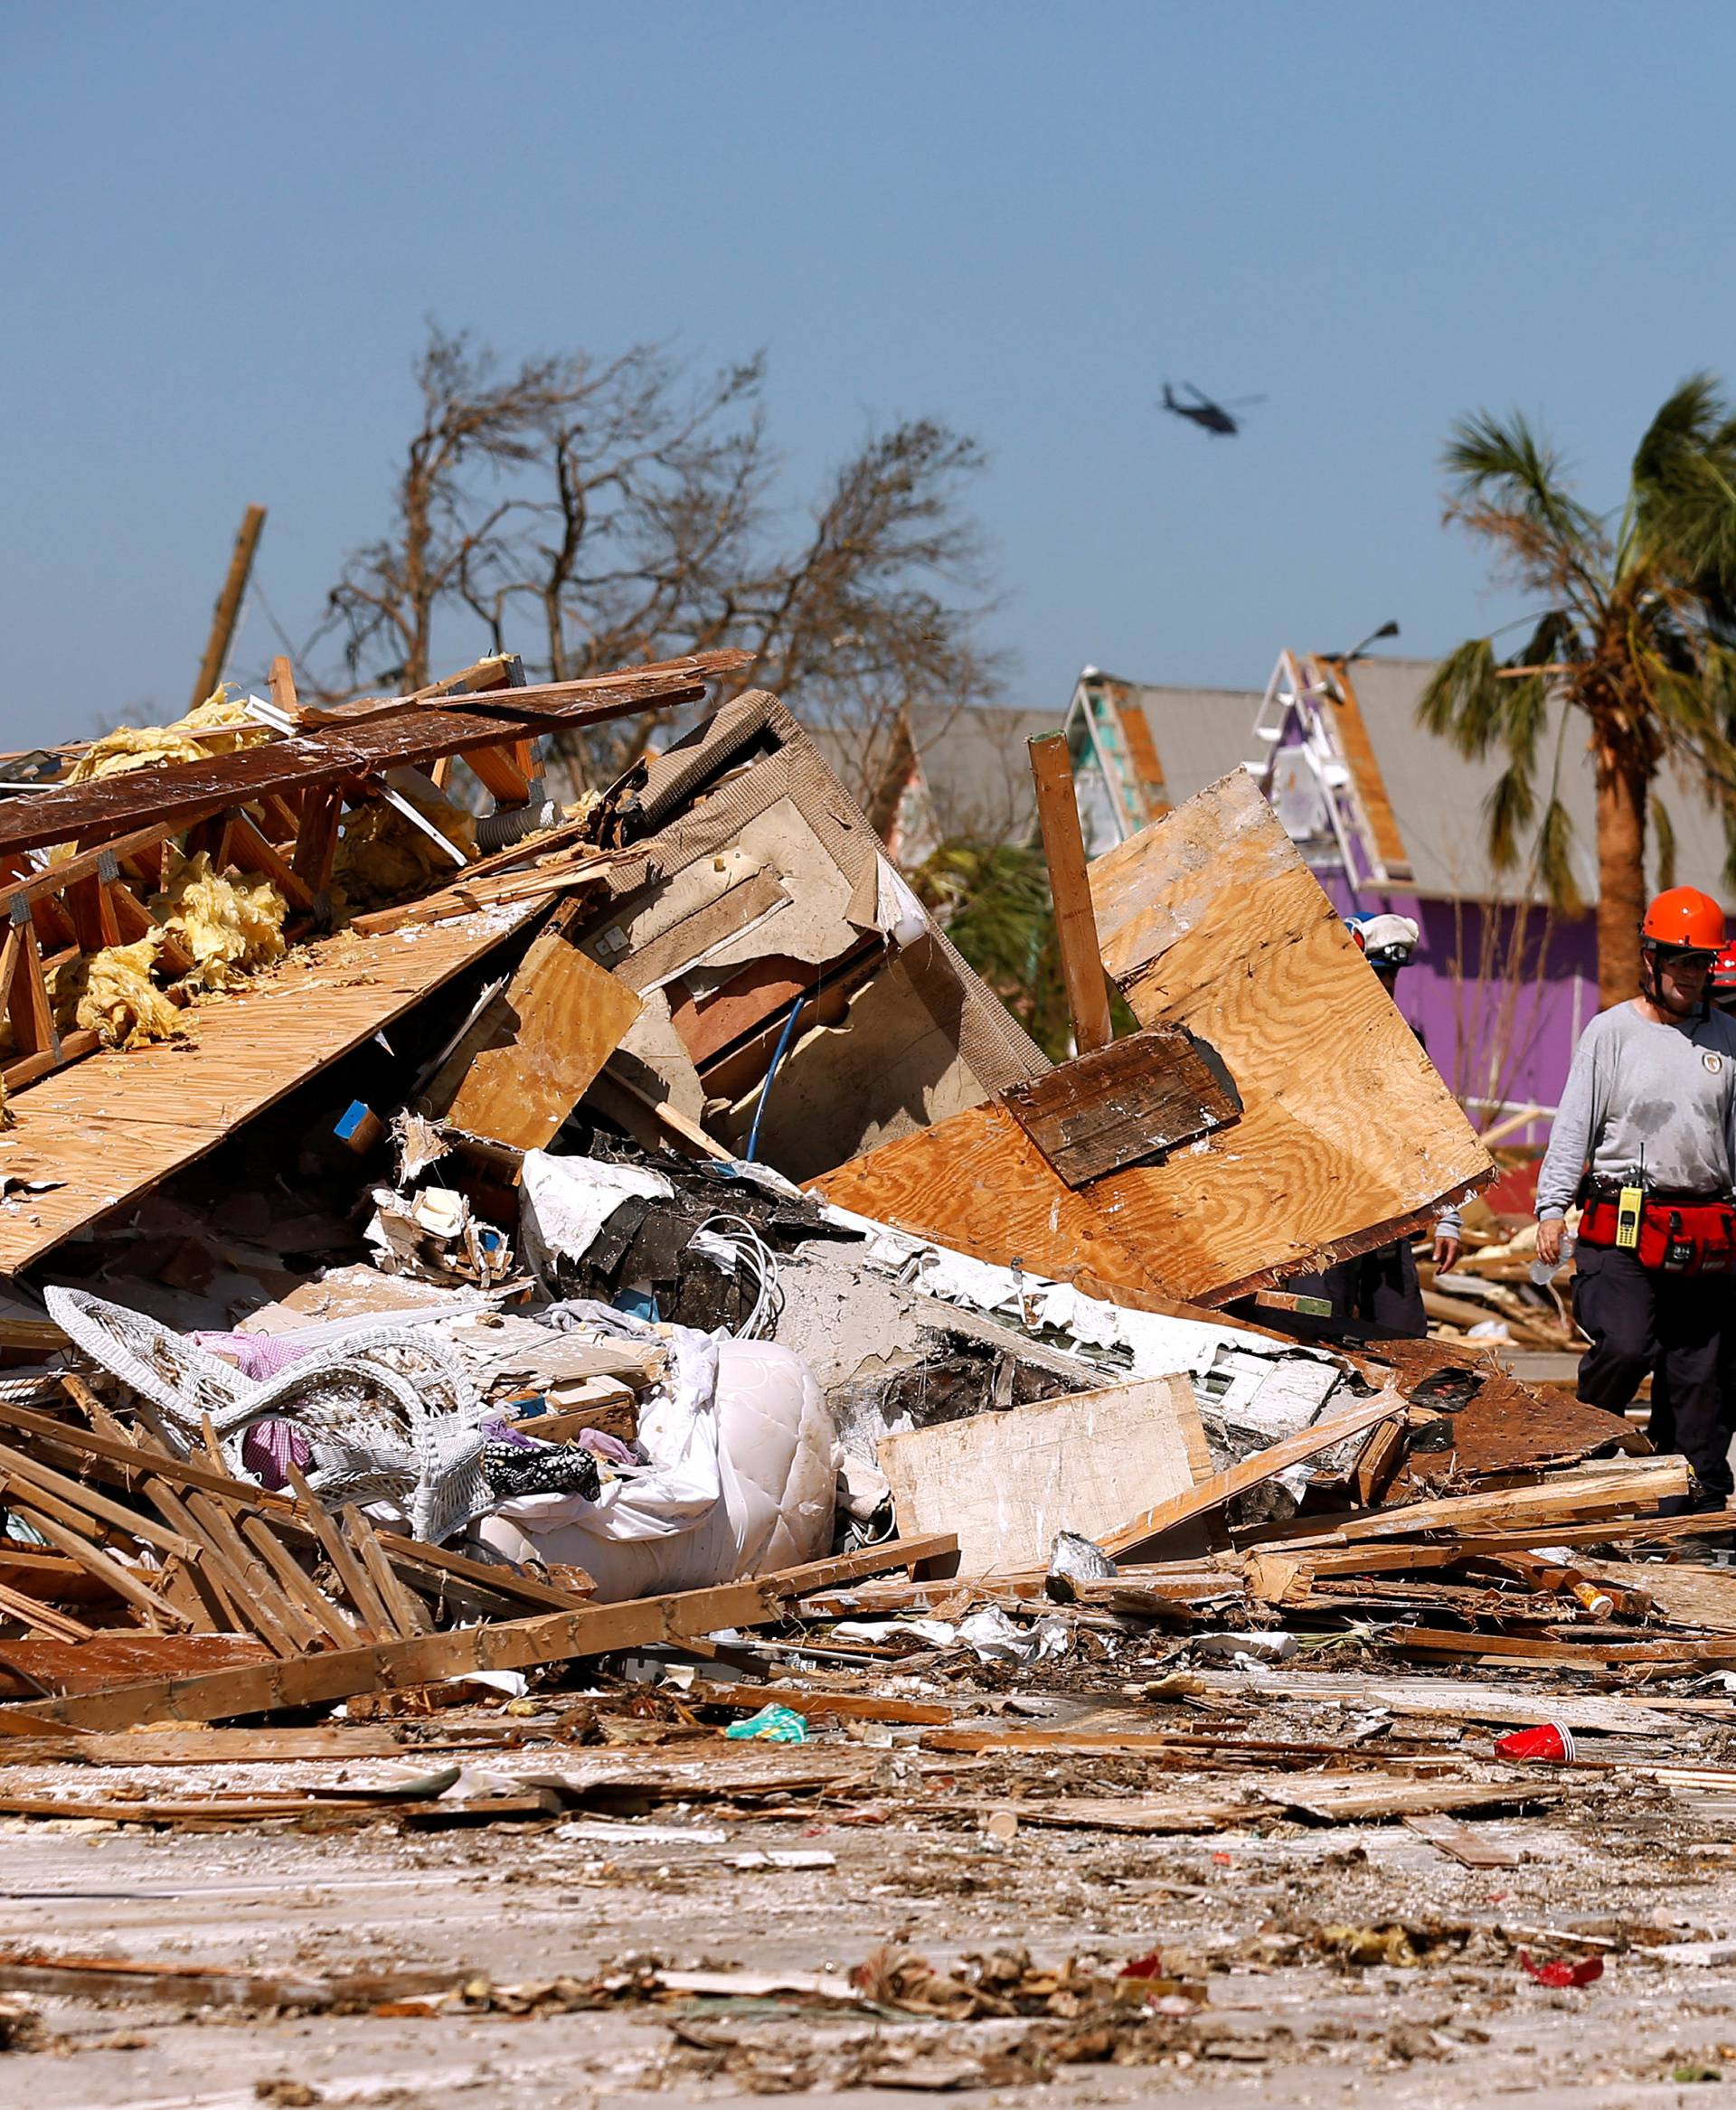 Search and rescue crews walk past debris caused by Hurricane Michael in Mexico Beach